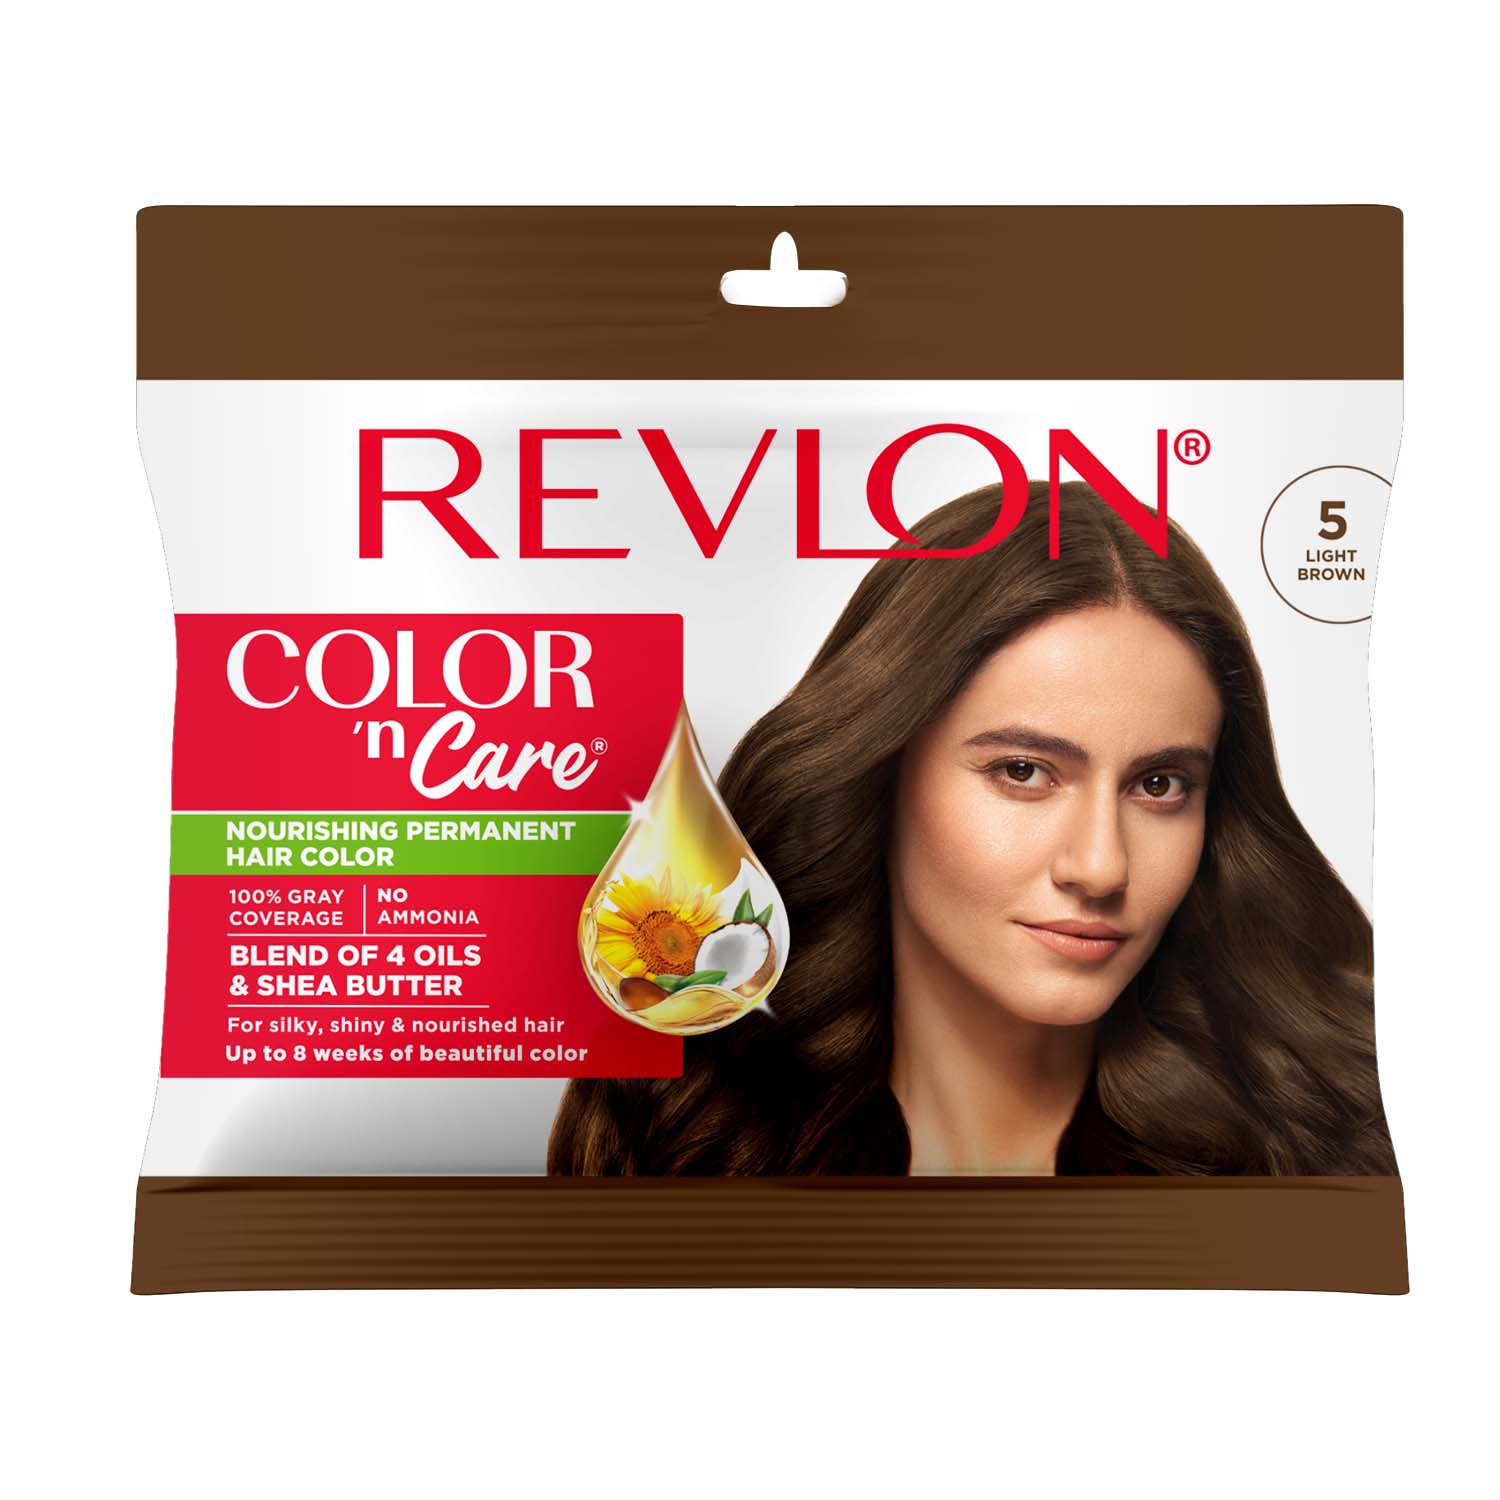 Revlon launched brand new Color 'N Care: The Ultimate Hair Color Experience with deep Nourishment & Care